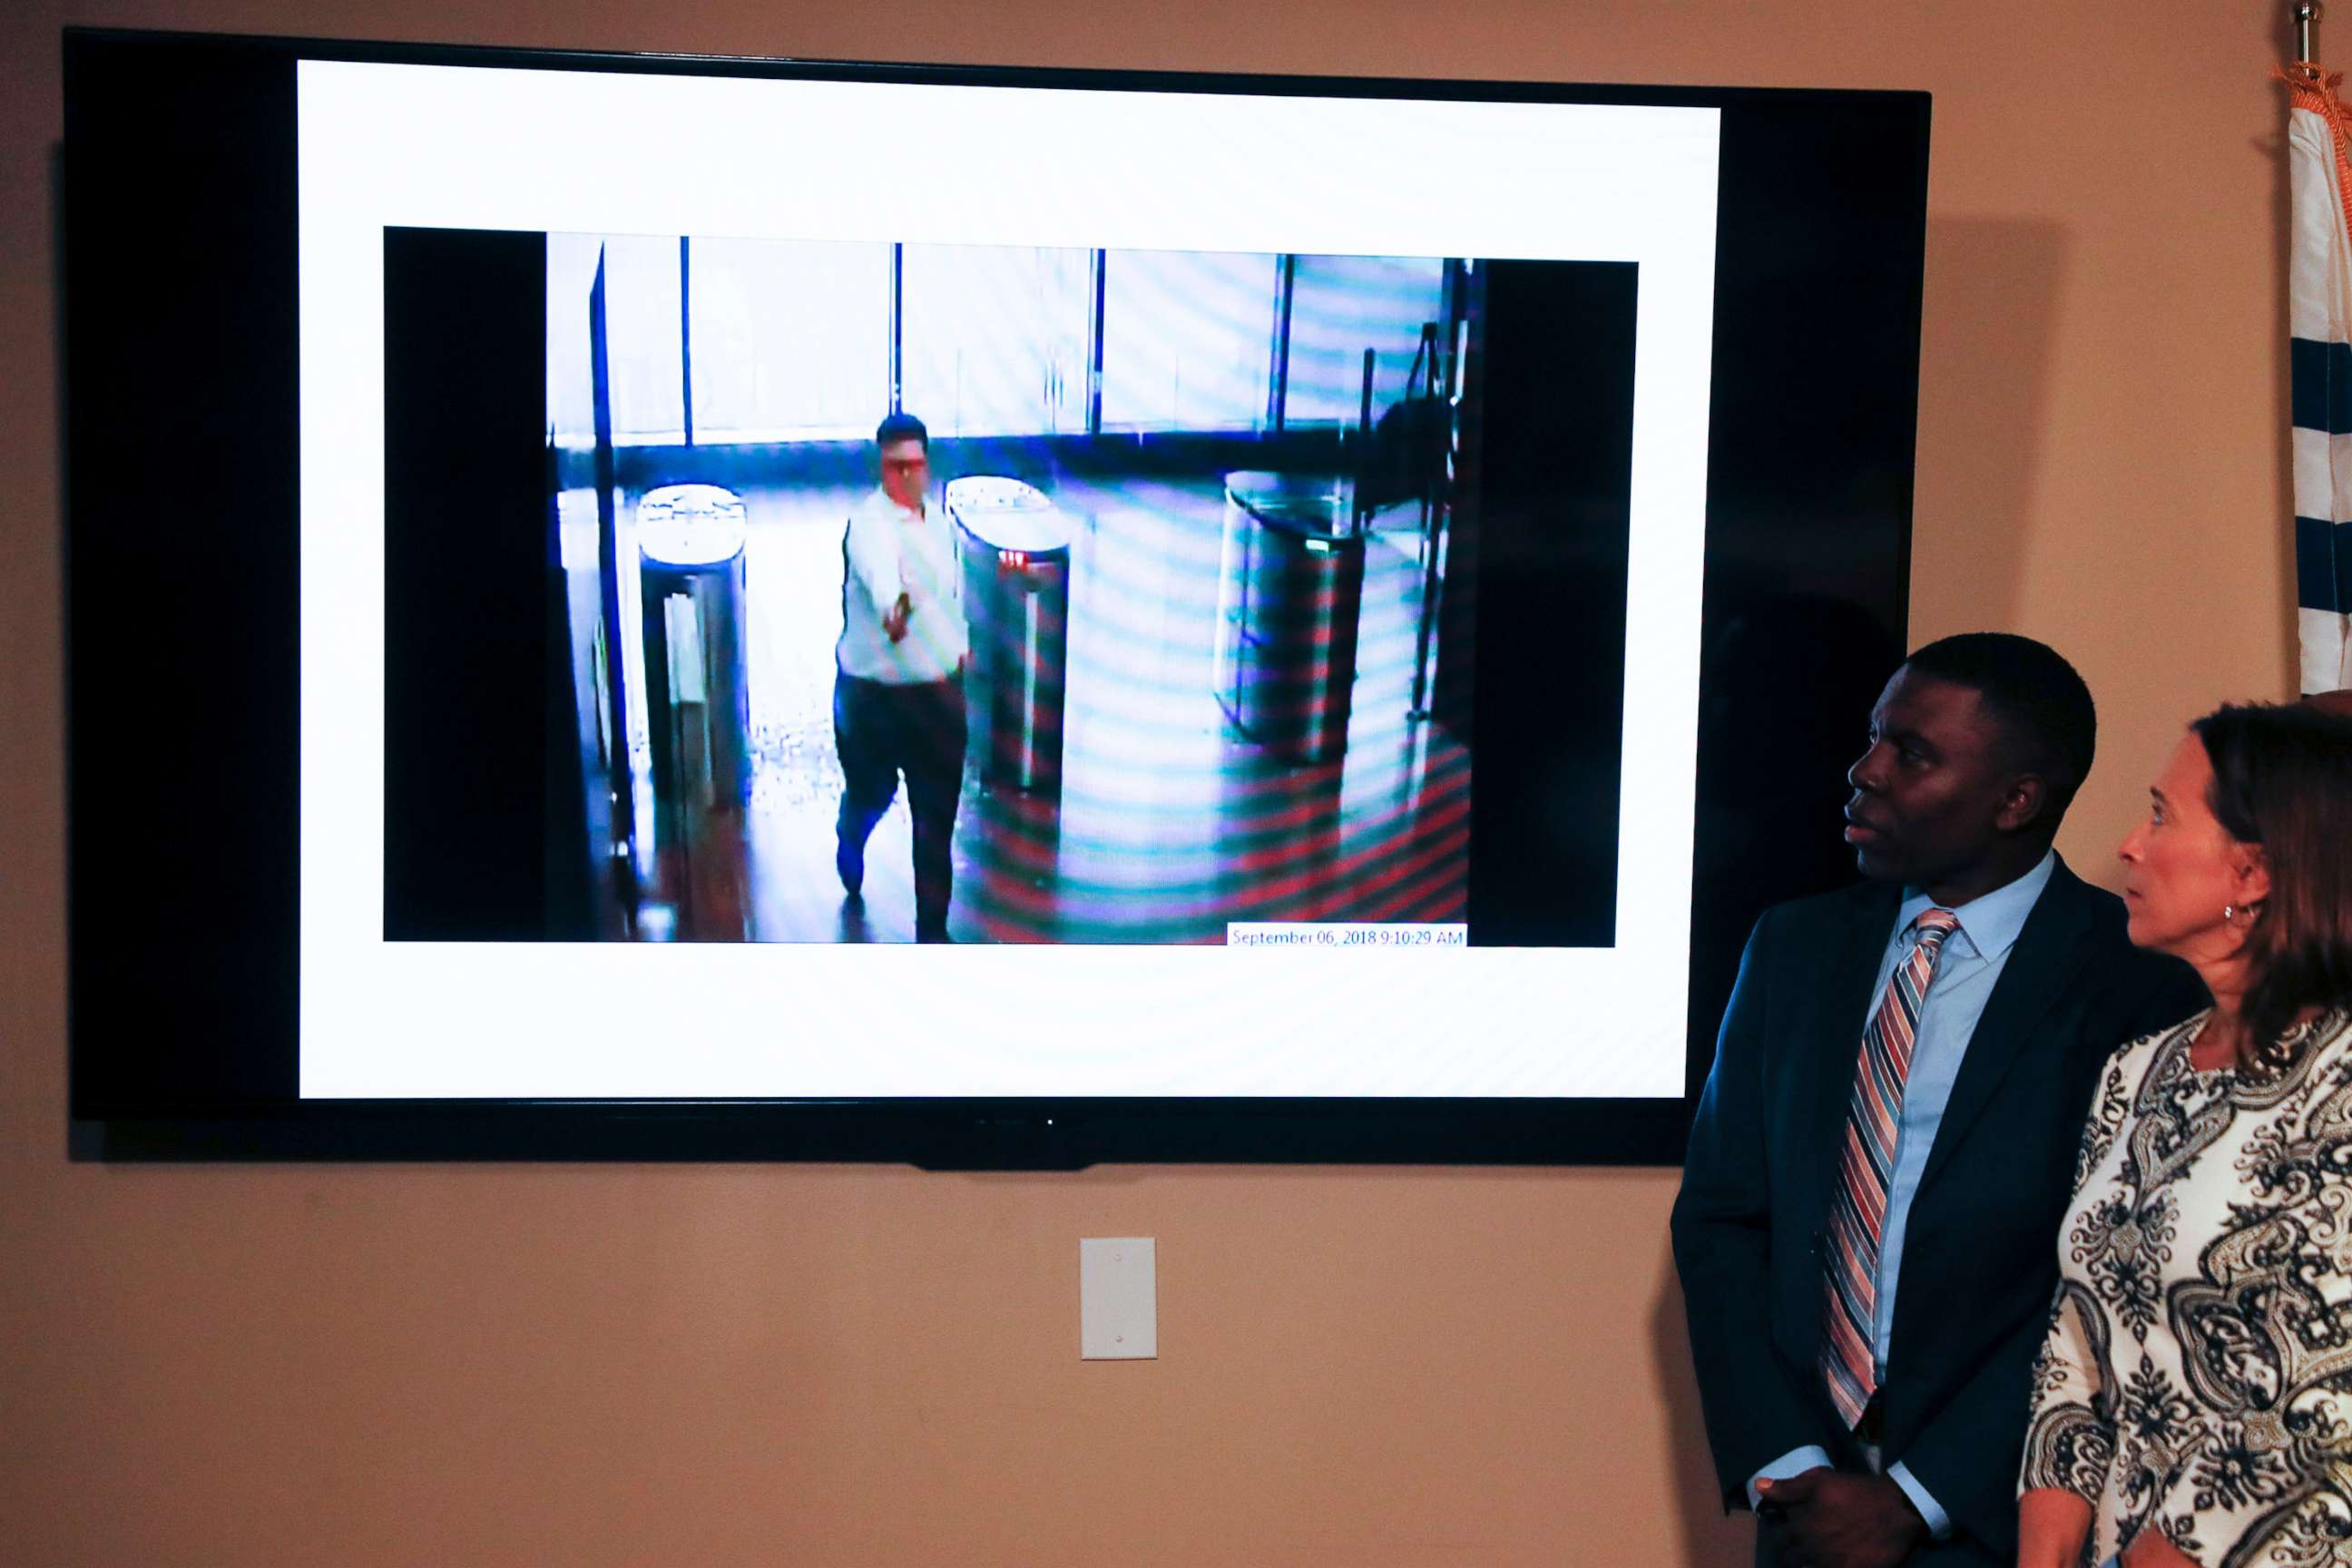 PHOTO: Suspect Omar Enrique Santa Perez is displayed on a security video that was shown during a news conference, Sept. 7, 2018, in Cincinnati, detailing the shooting incident from the previous day in the city's downtown business district.